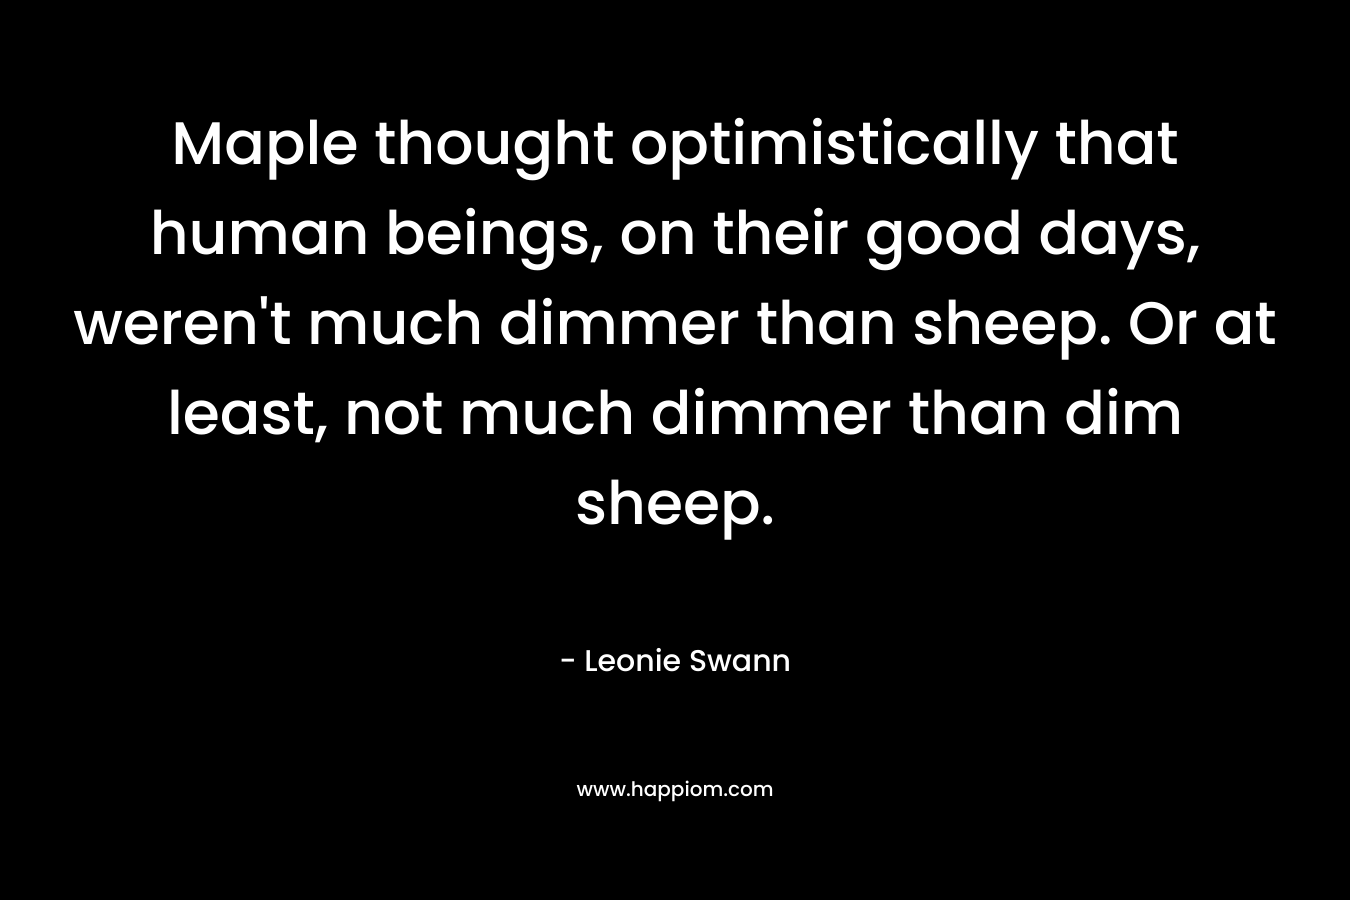 Maple thought optimistically that human beings, on their good days, weren’t much dimmer than sheep. Or at least, not much dimmer than dim sheep. – Leonie Swann